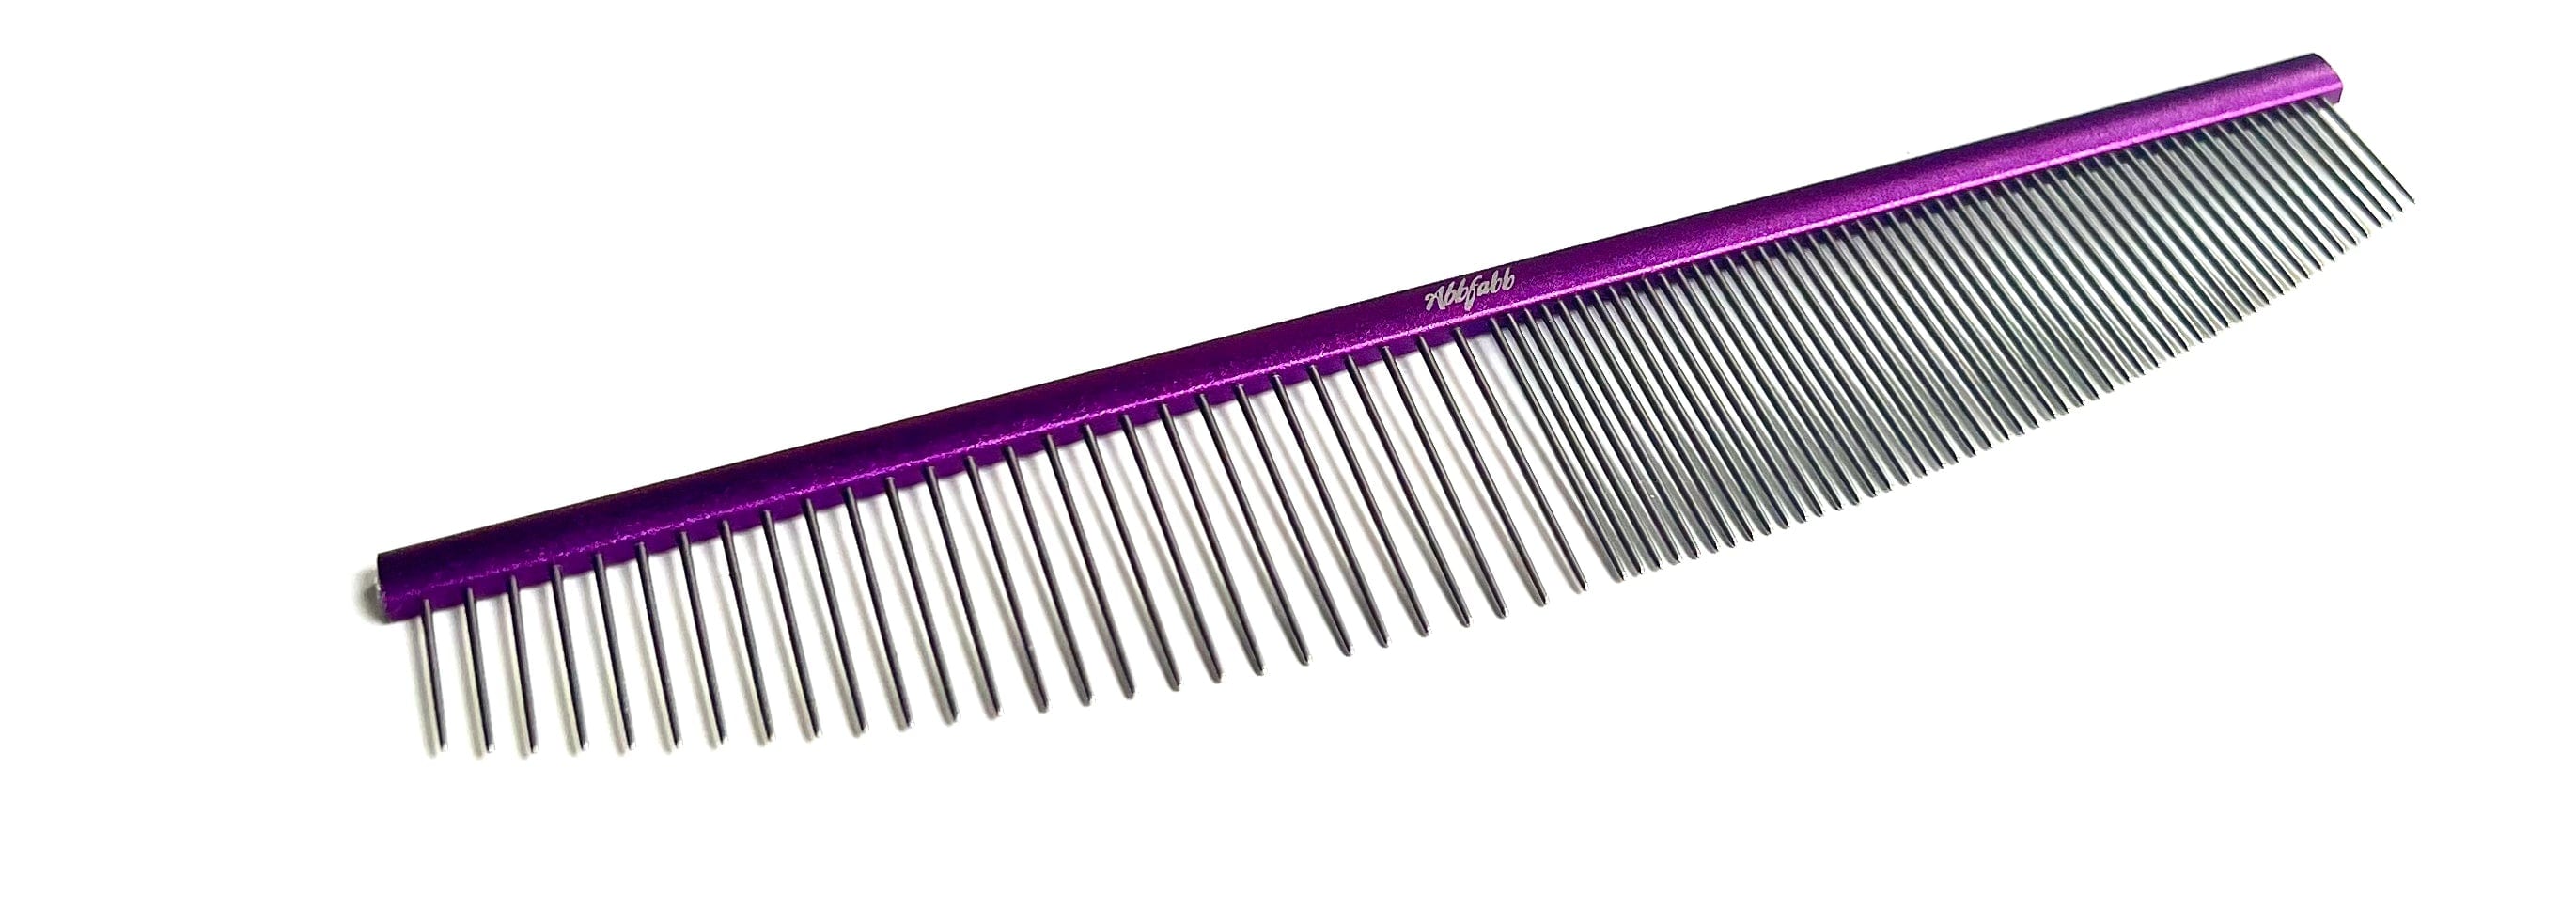 Abbfabb Grooming Scissors 8" Dual Purpose Crescent Comb in purple. Moon comb for dog grooming 